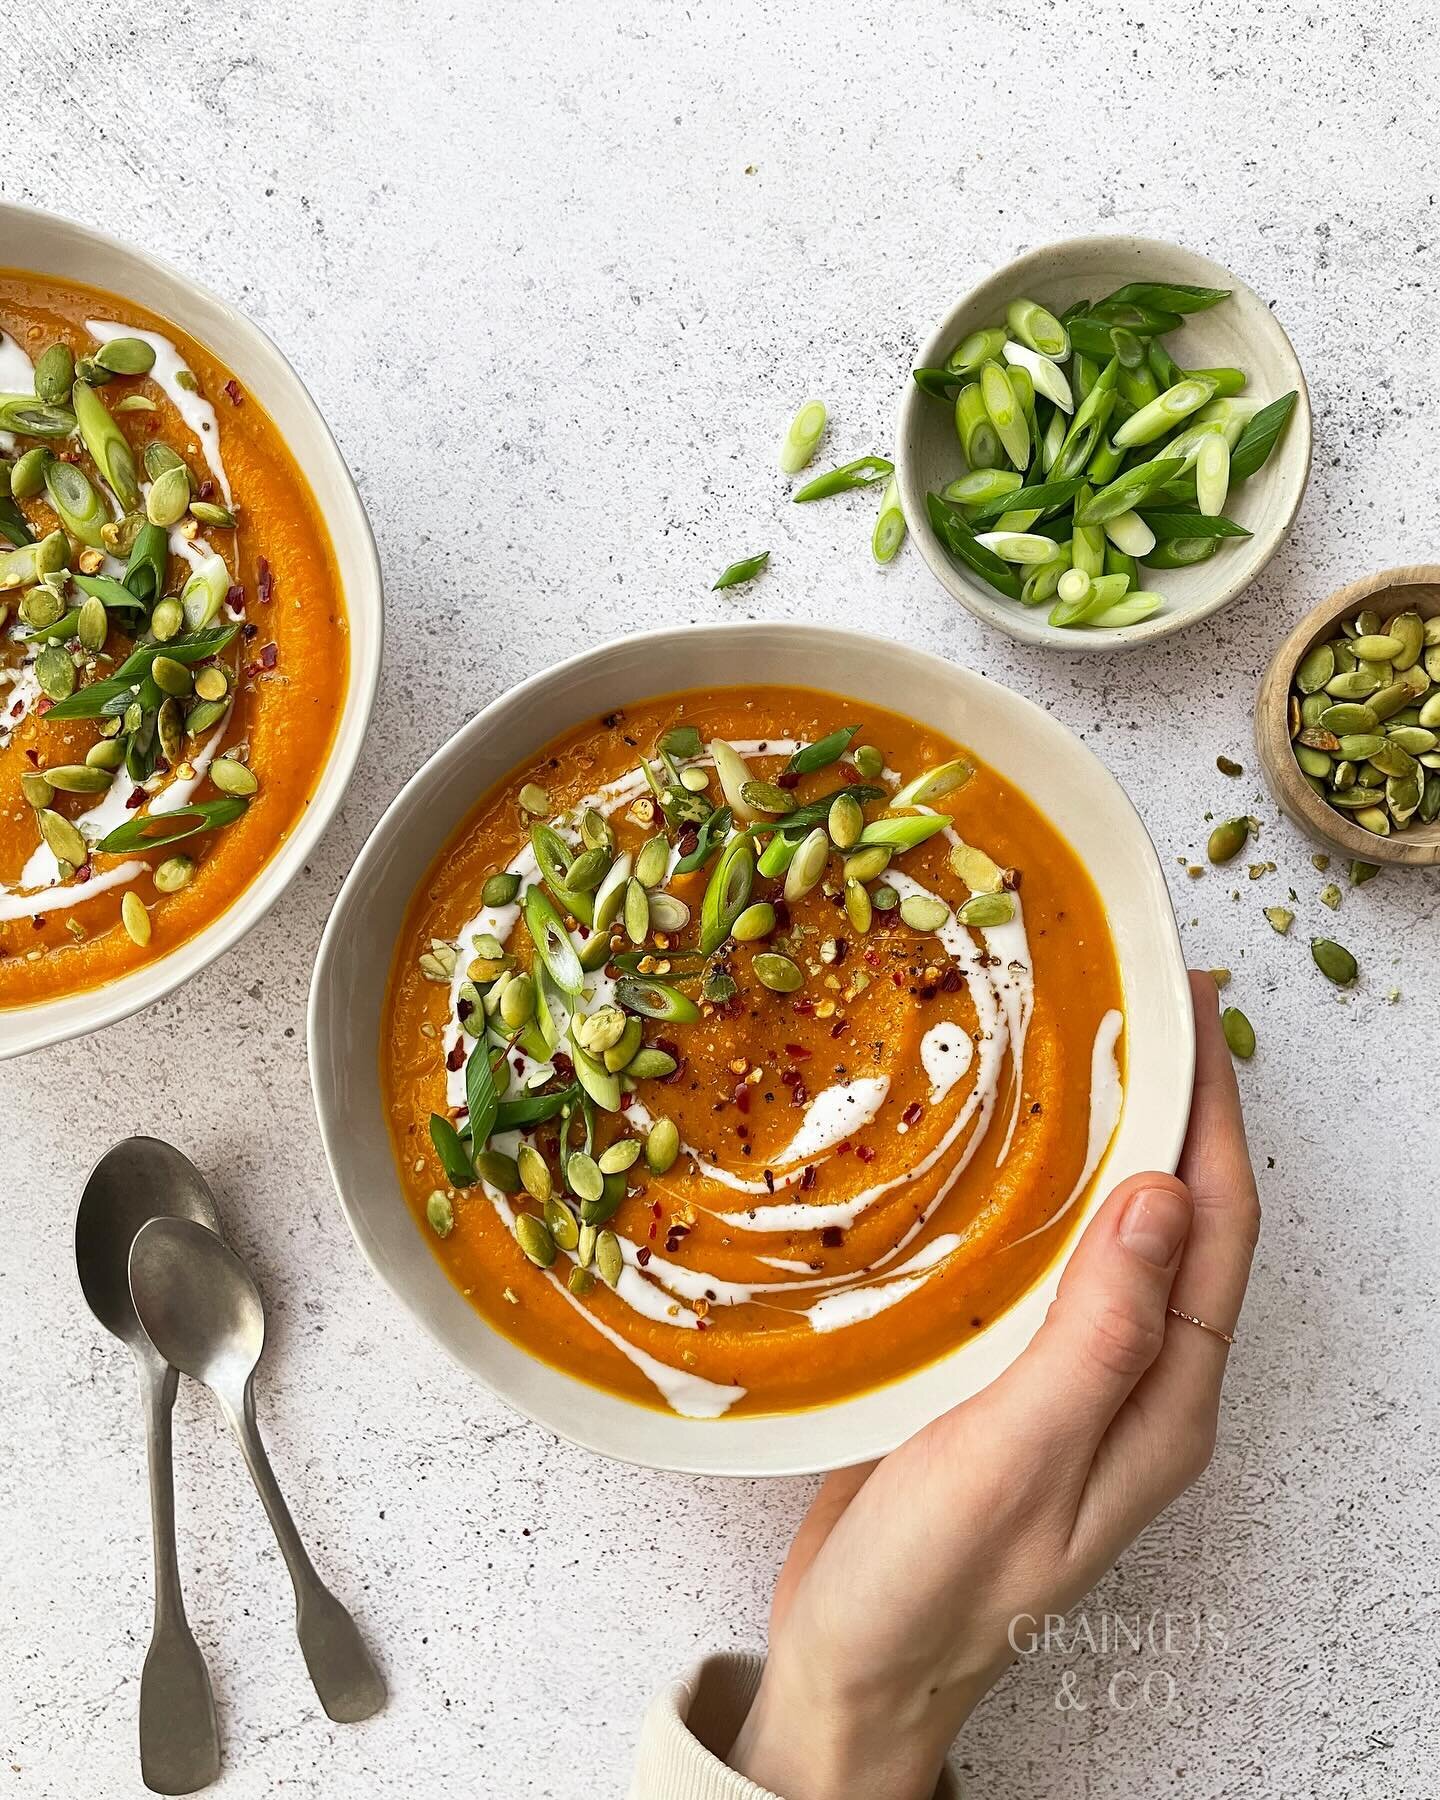 &bull; SWEET POTATO &amp; CARROT SOUP &bull; At its essence a simple carrot &amp; sweet potato soup, this version is packed with vitamins &amp; anti-oxidants to fight those Winter sniffles away &amp; give yourself that well-deserved energy boost!

Ov